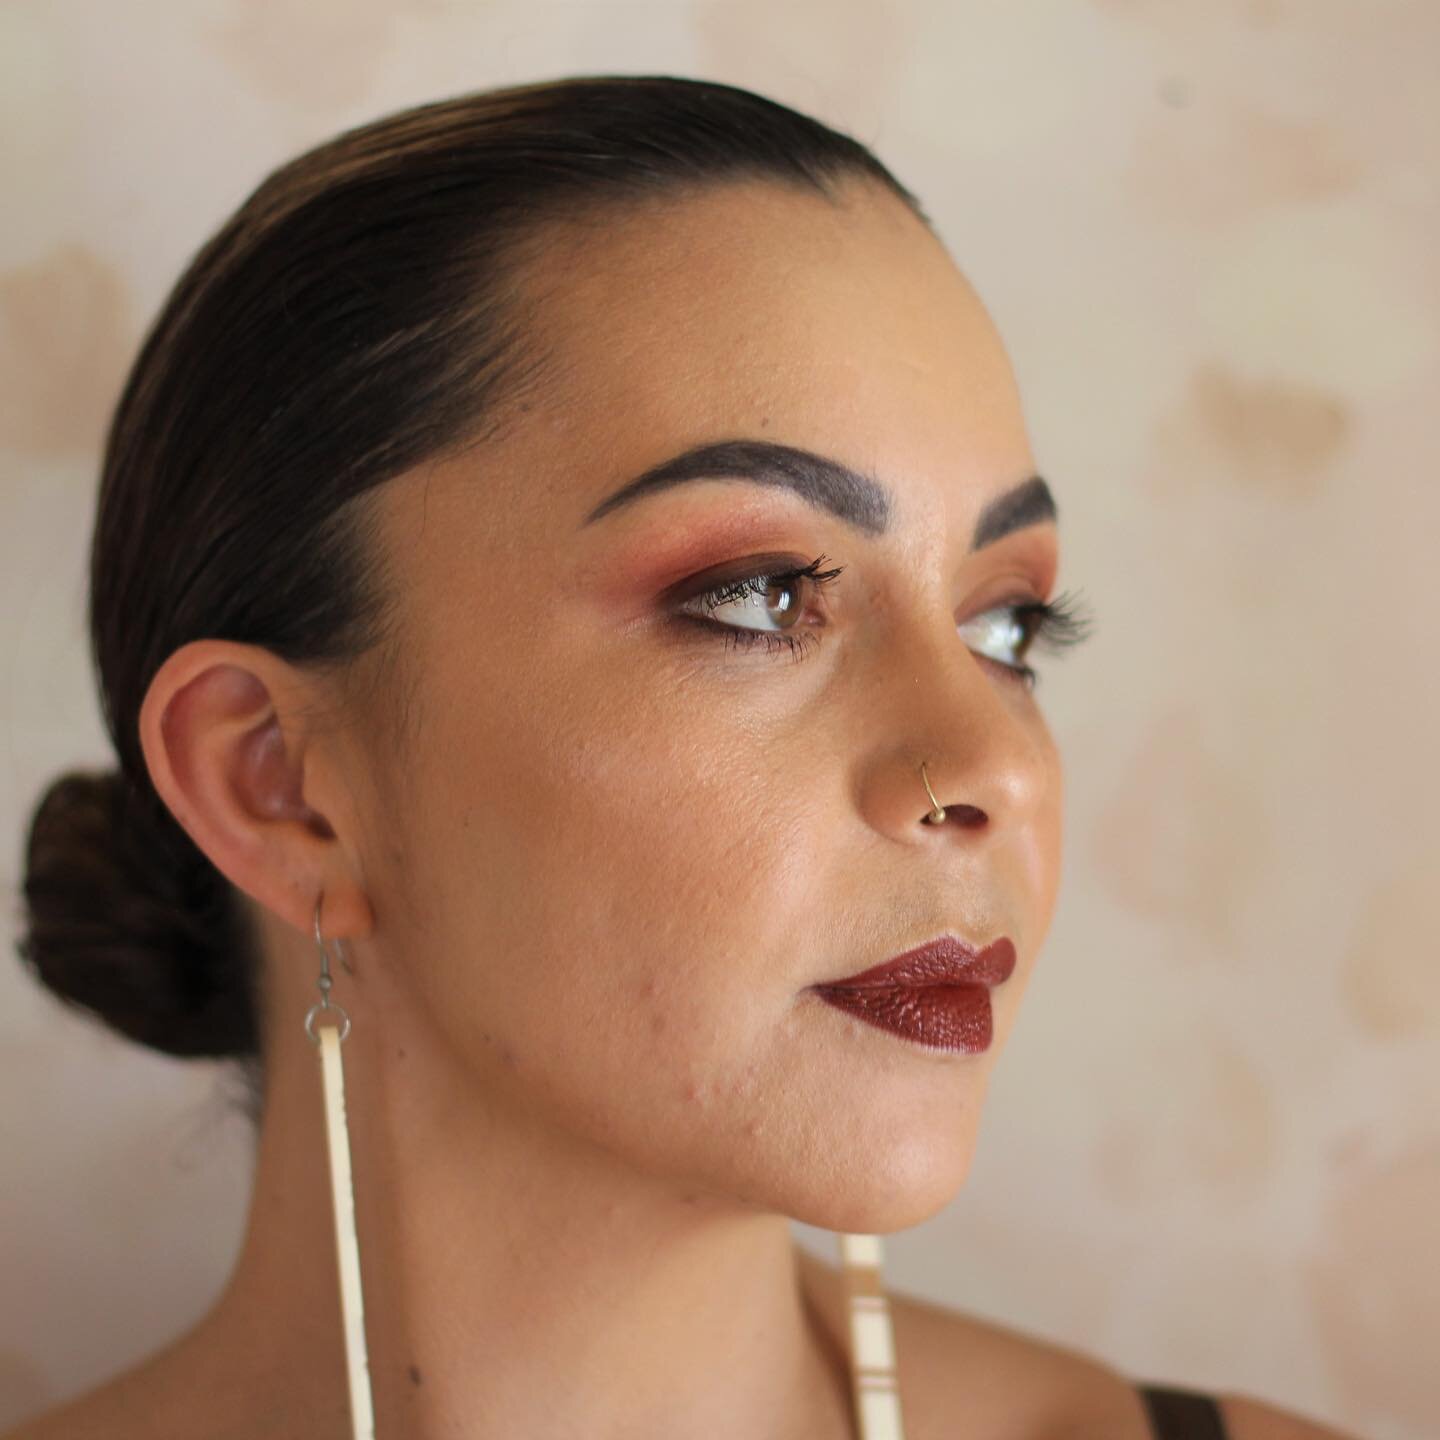 This month we got to try something out that we've always thought would work a treat, makeup made with earth pigments.

Lanae enlisted Ngāi Te Rangi, Te Aupouri, Ngāti Ruanui makeup artist @mssjt_  to see how her soil-based pressed powders, lipsticks 